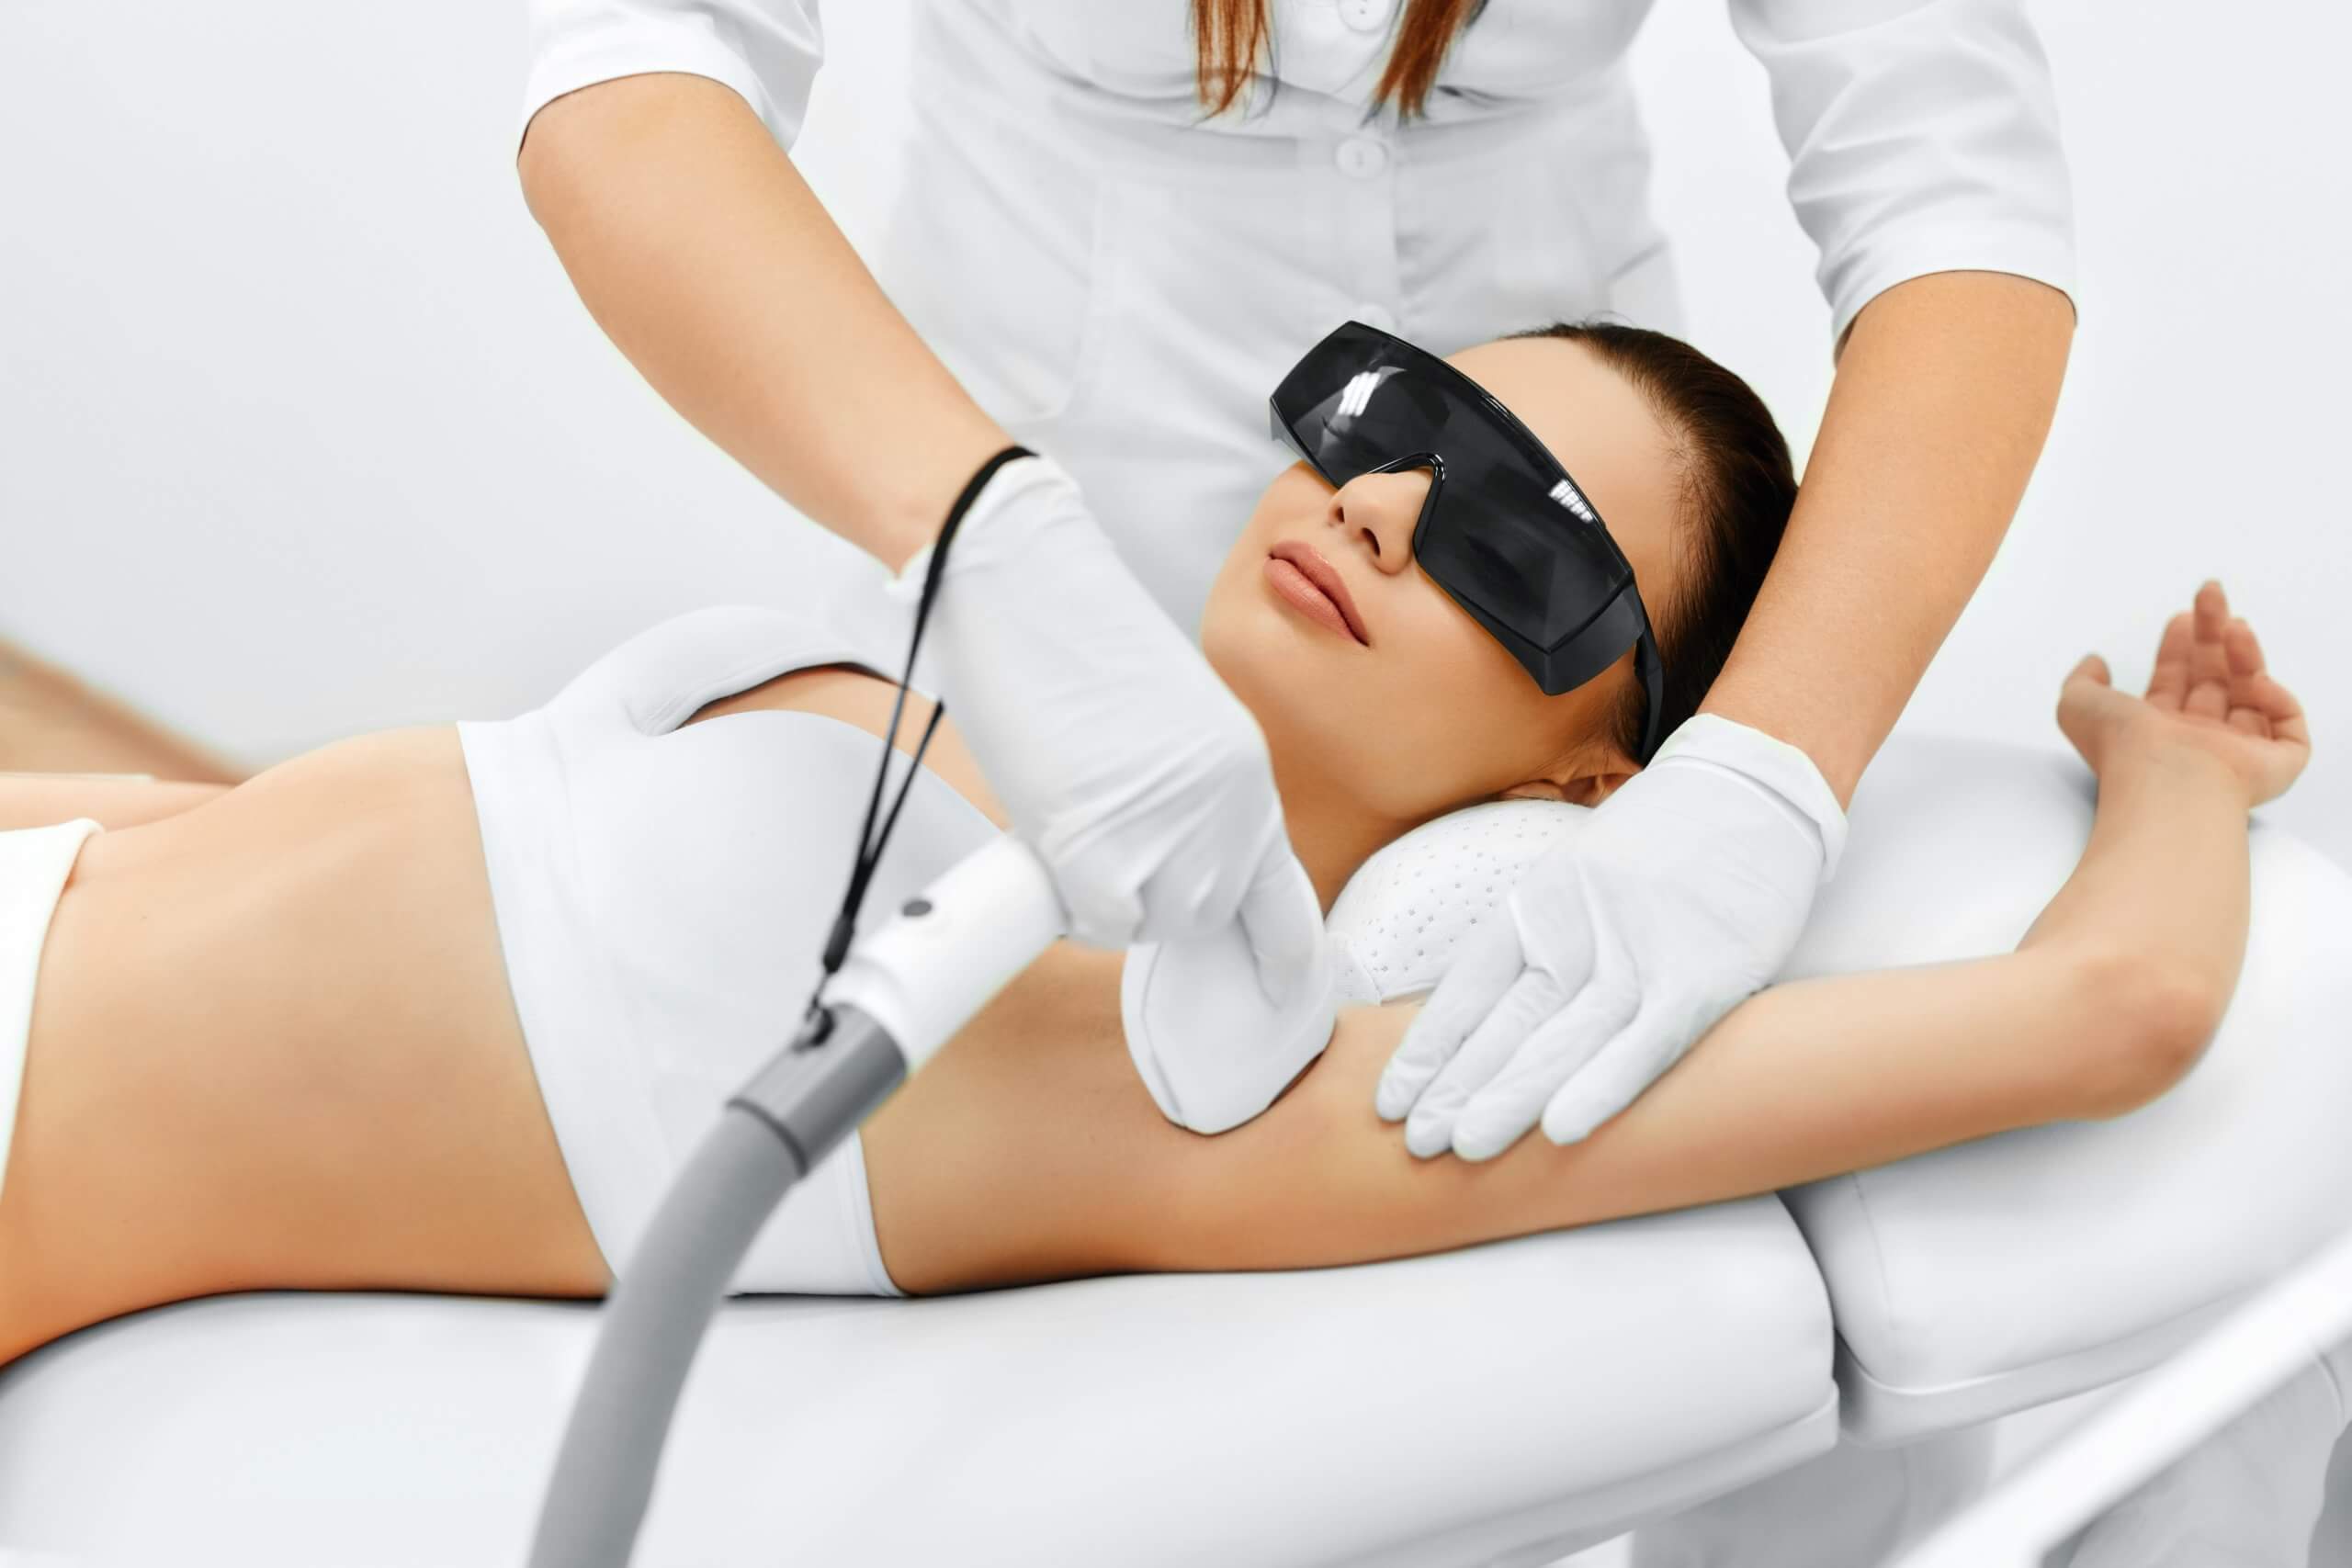 What are the benefits of laser hair removal treatment scaled